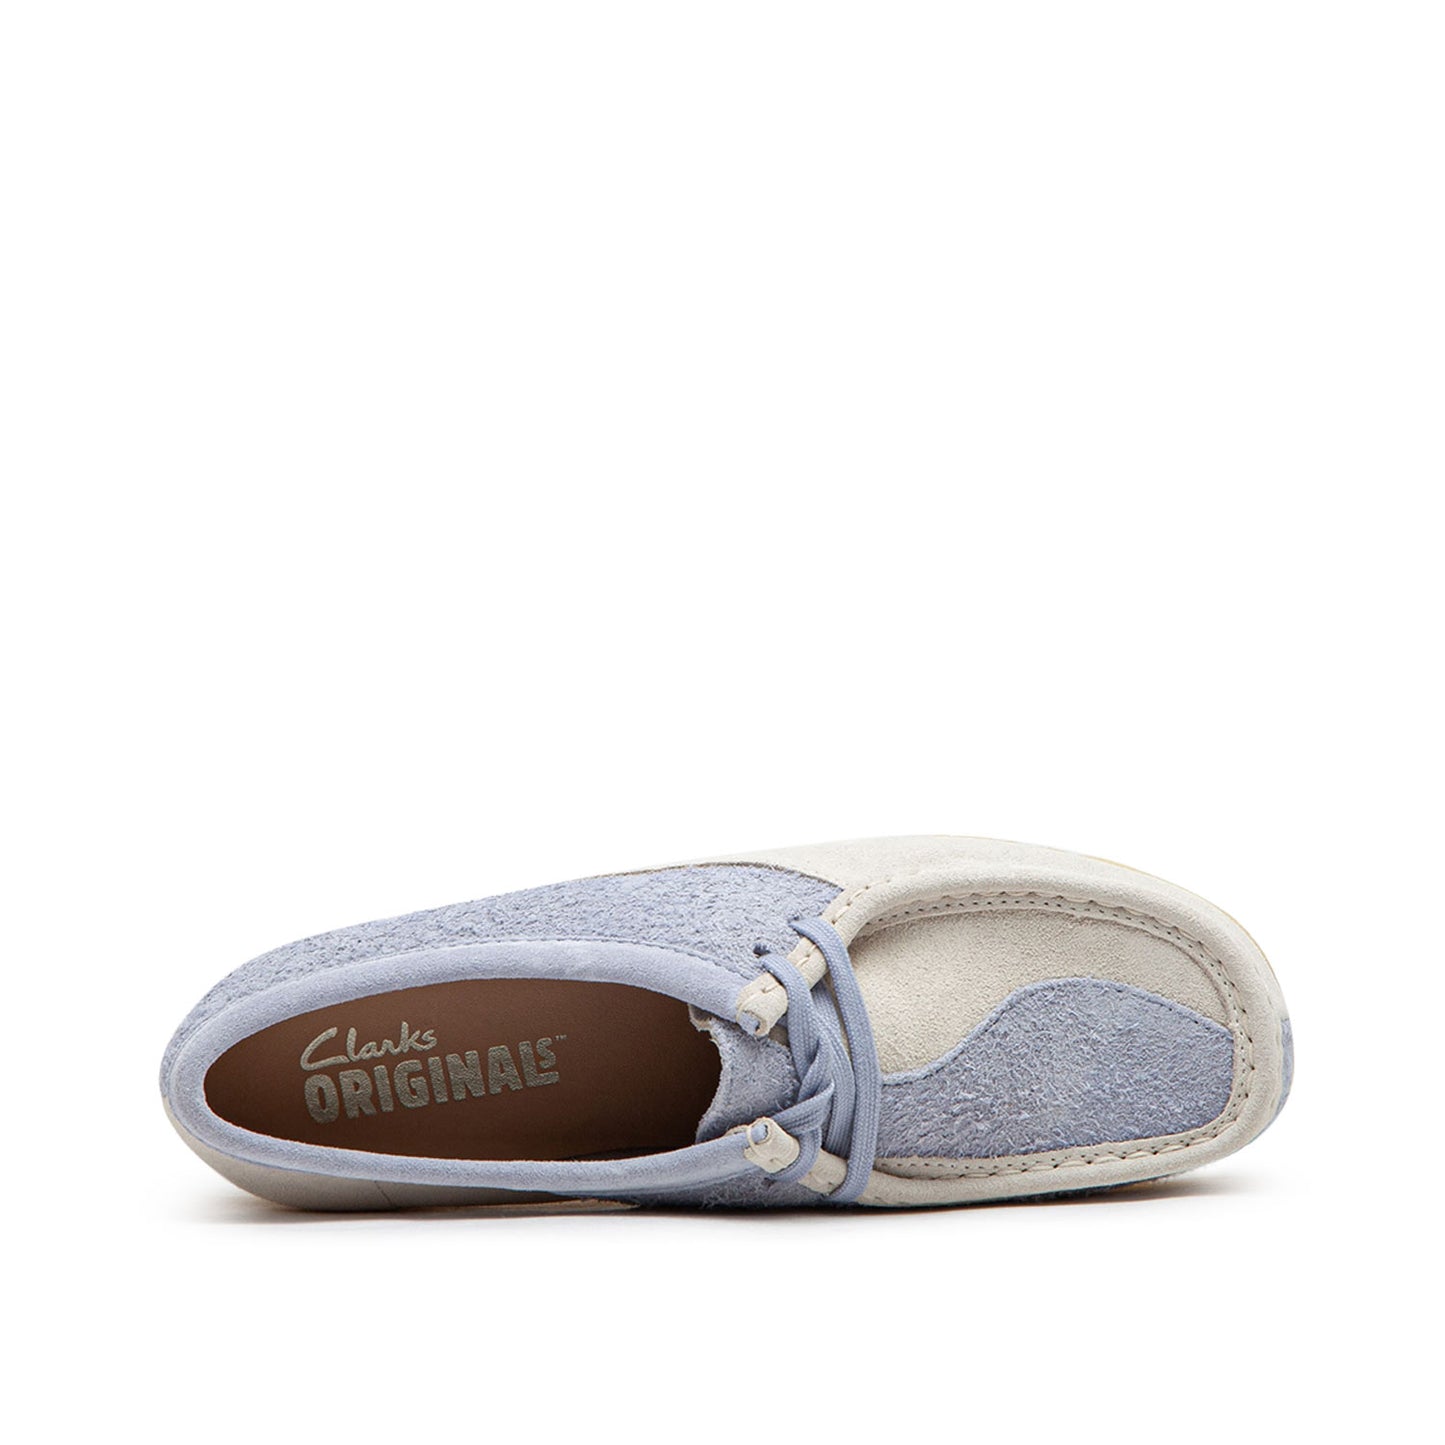 Clarks Wmns Wallabee days right of withdrawal (Grey)